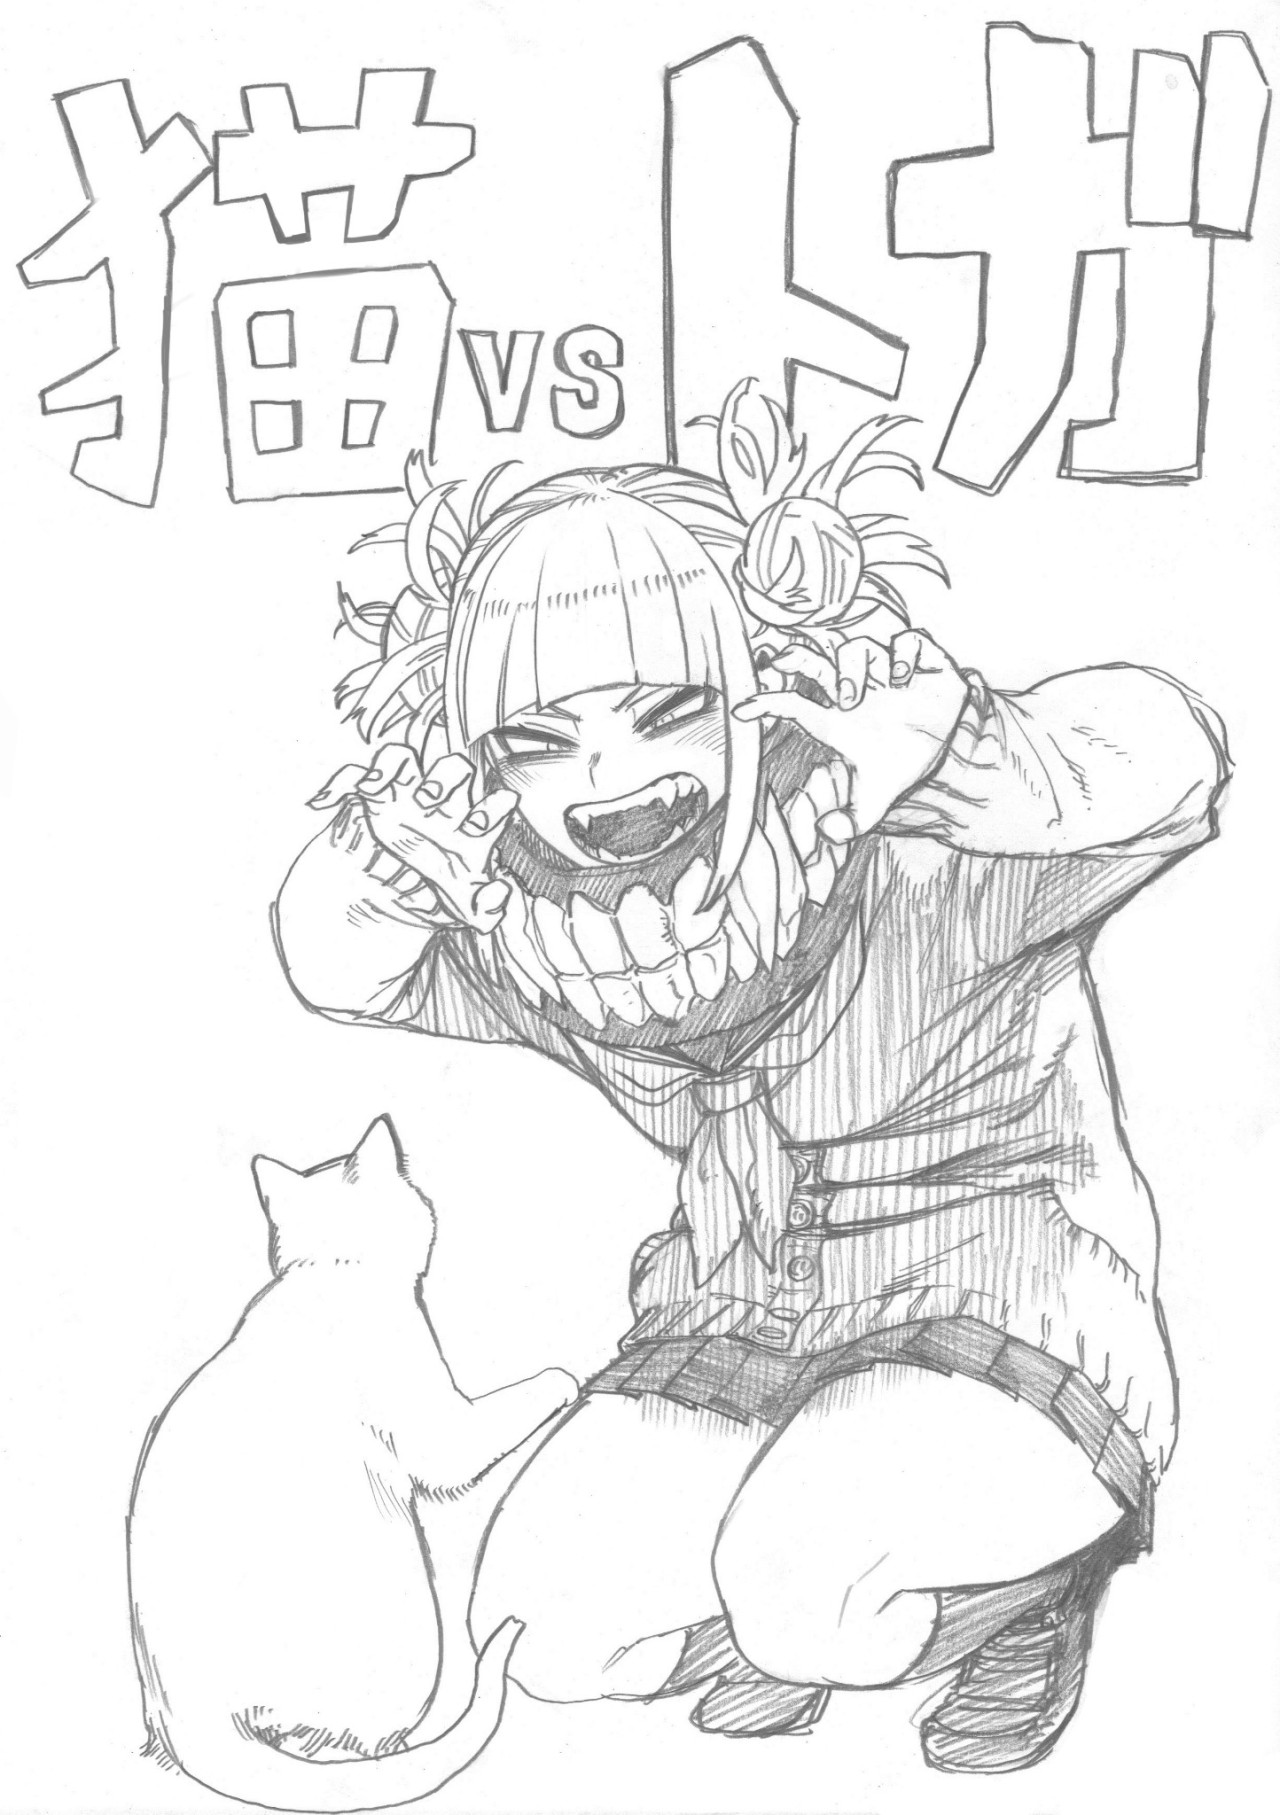 All of Horikoshi's twitter sketches on Tumblr